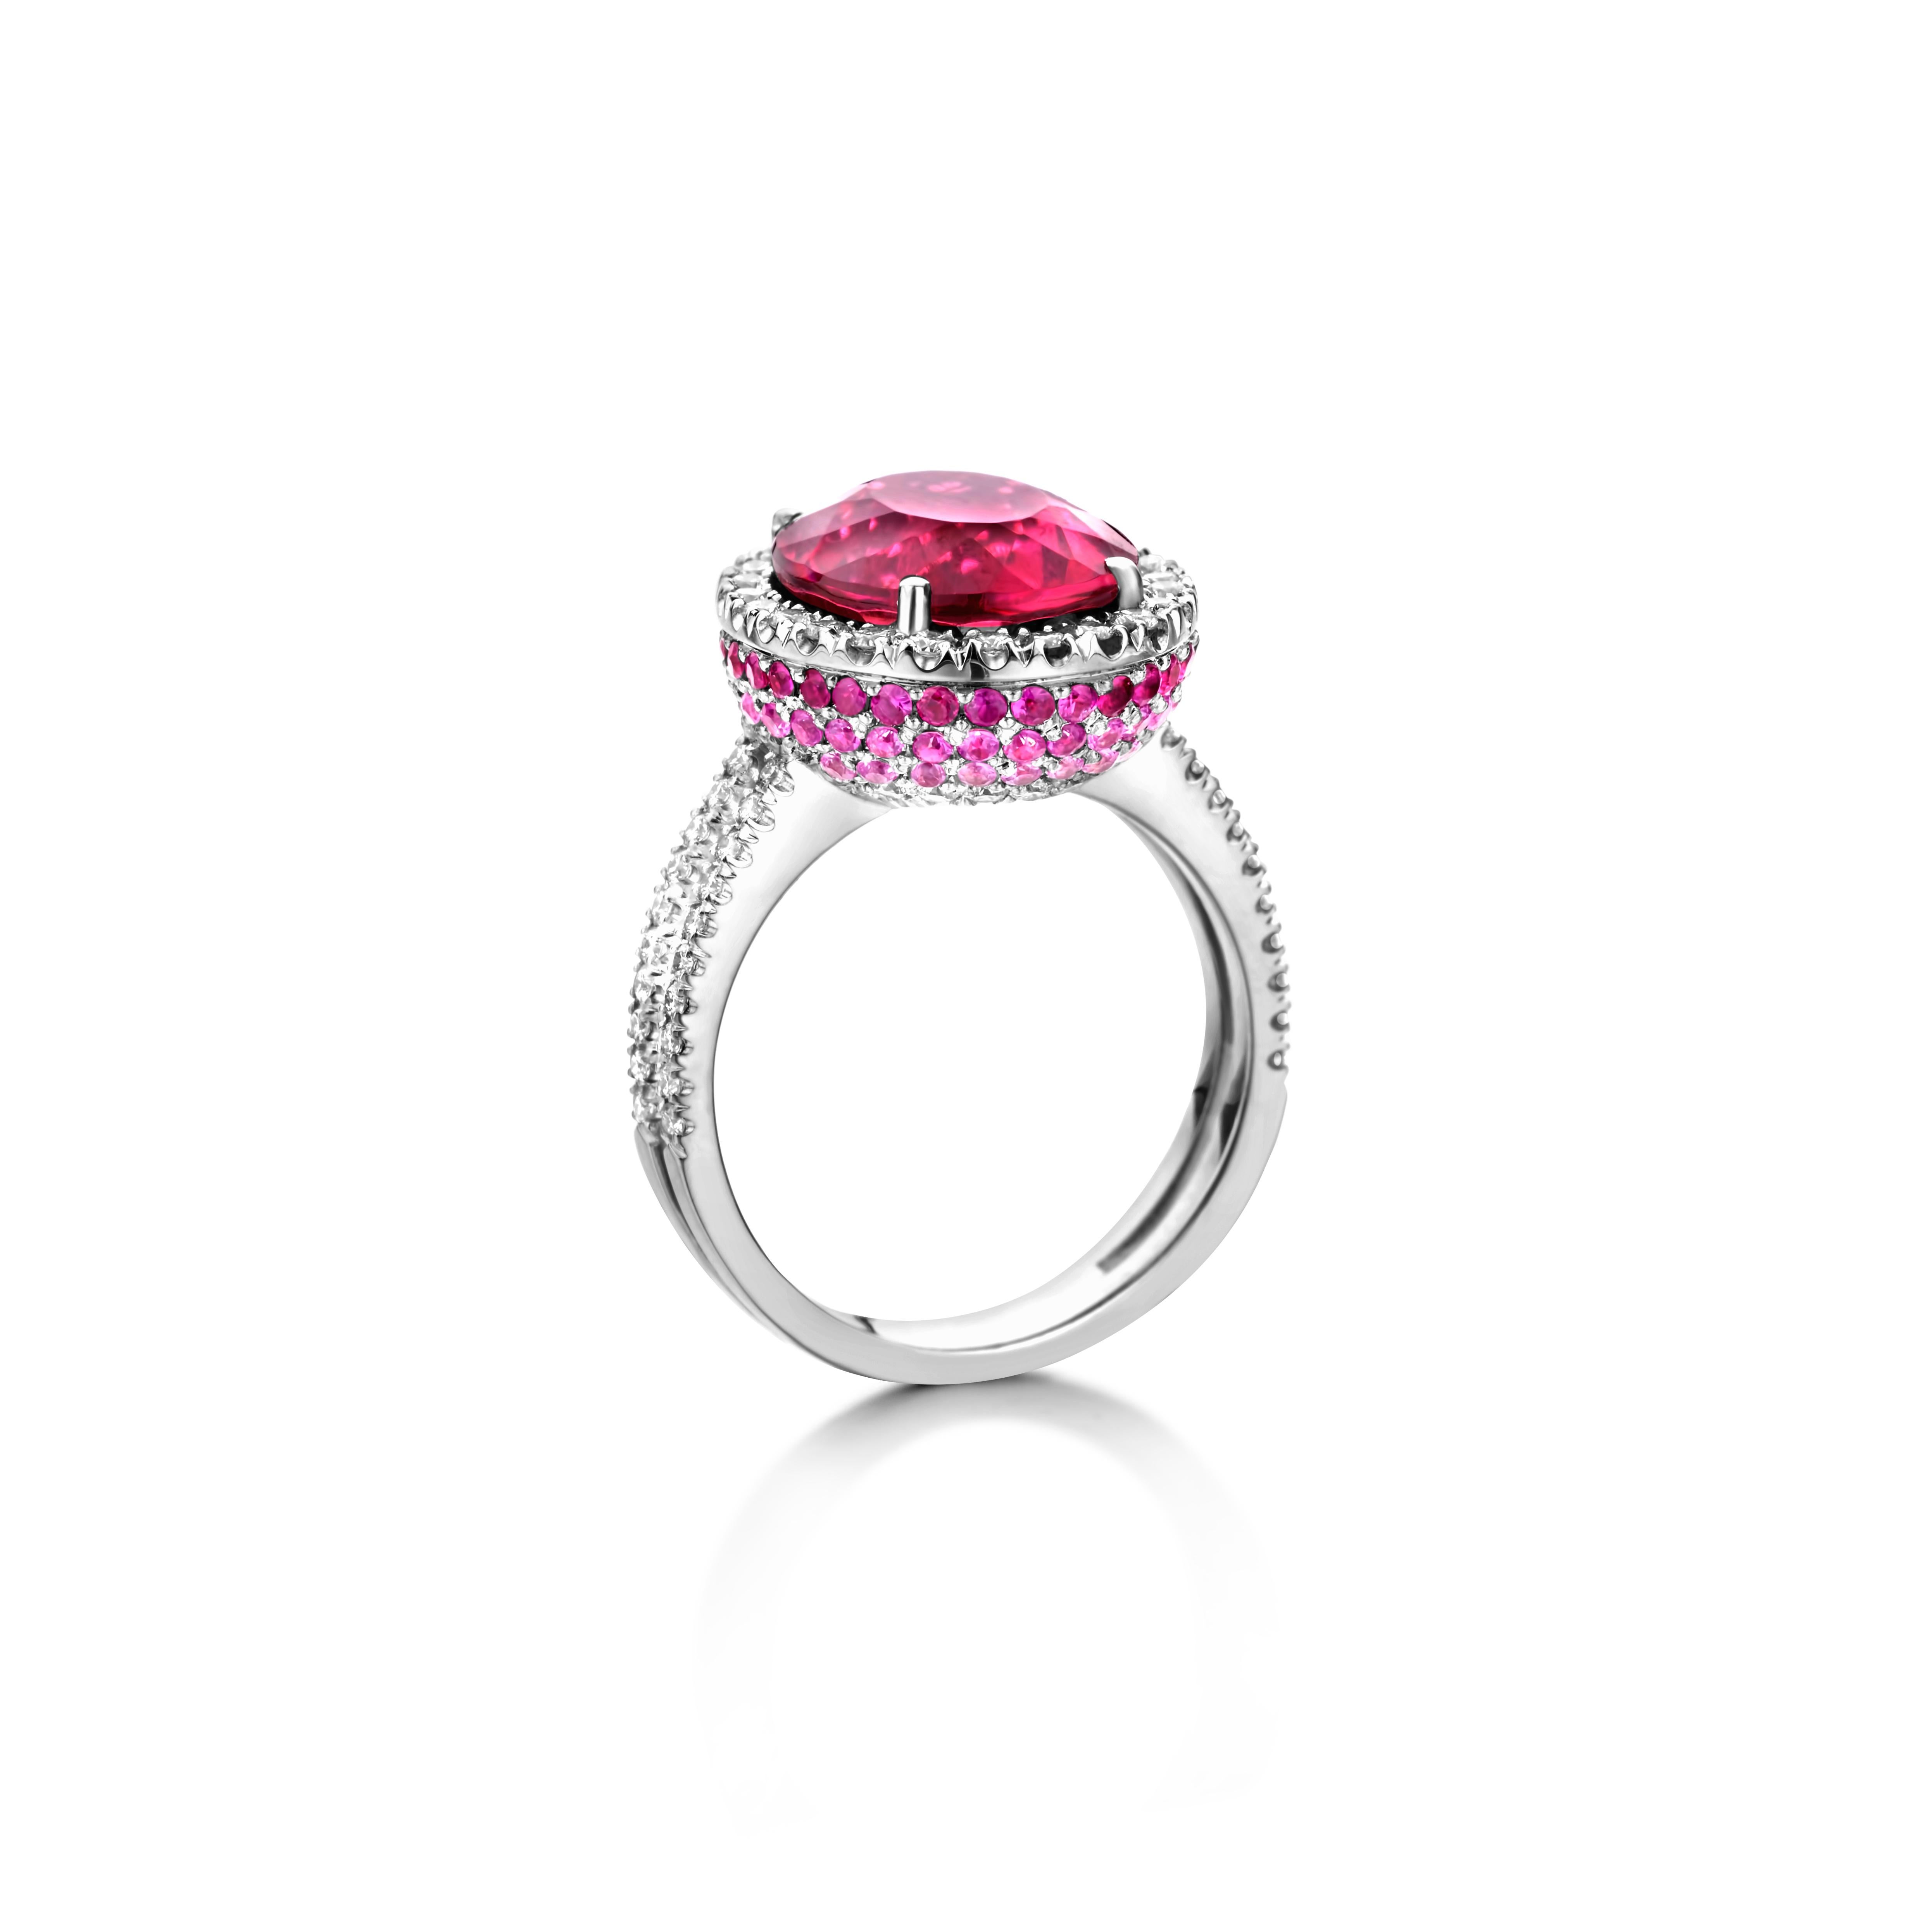 One of a kind cocktail ring in 18-Karat white gold (7,4g) set with 1 eye clean oval cut Rubelite Tourmaline, 0.81Ct pink sapphires set in dégradé pavé (dark, medium, light) and the finest white diamonds 0.70Ct VS/F quality in brilliant cut. 

Celine